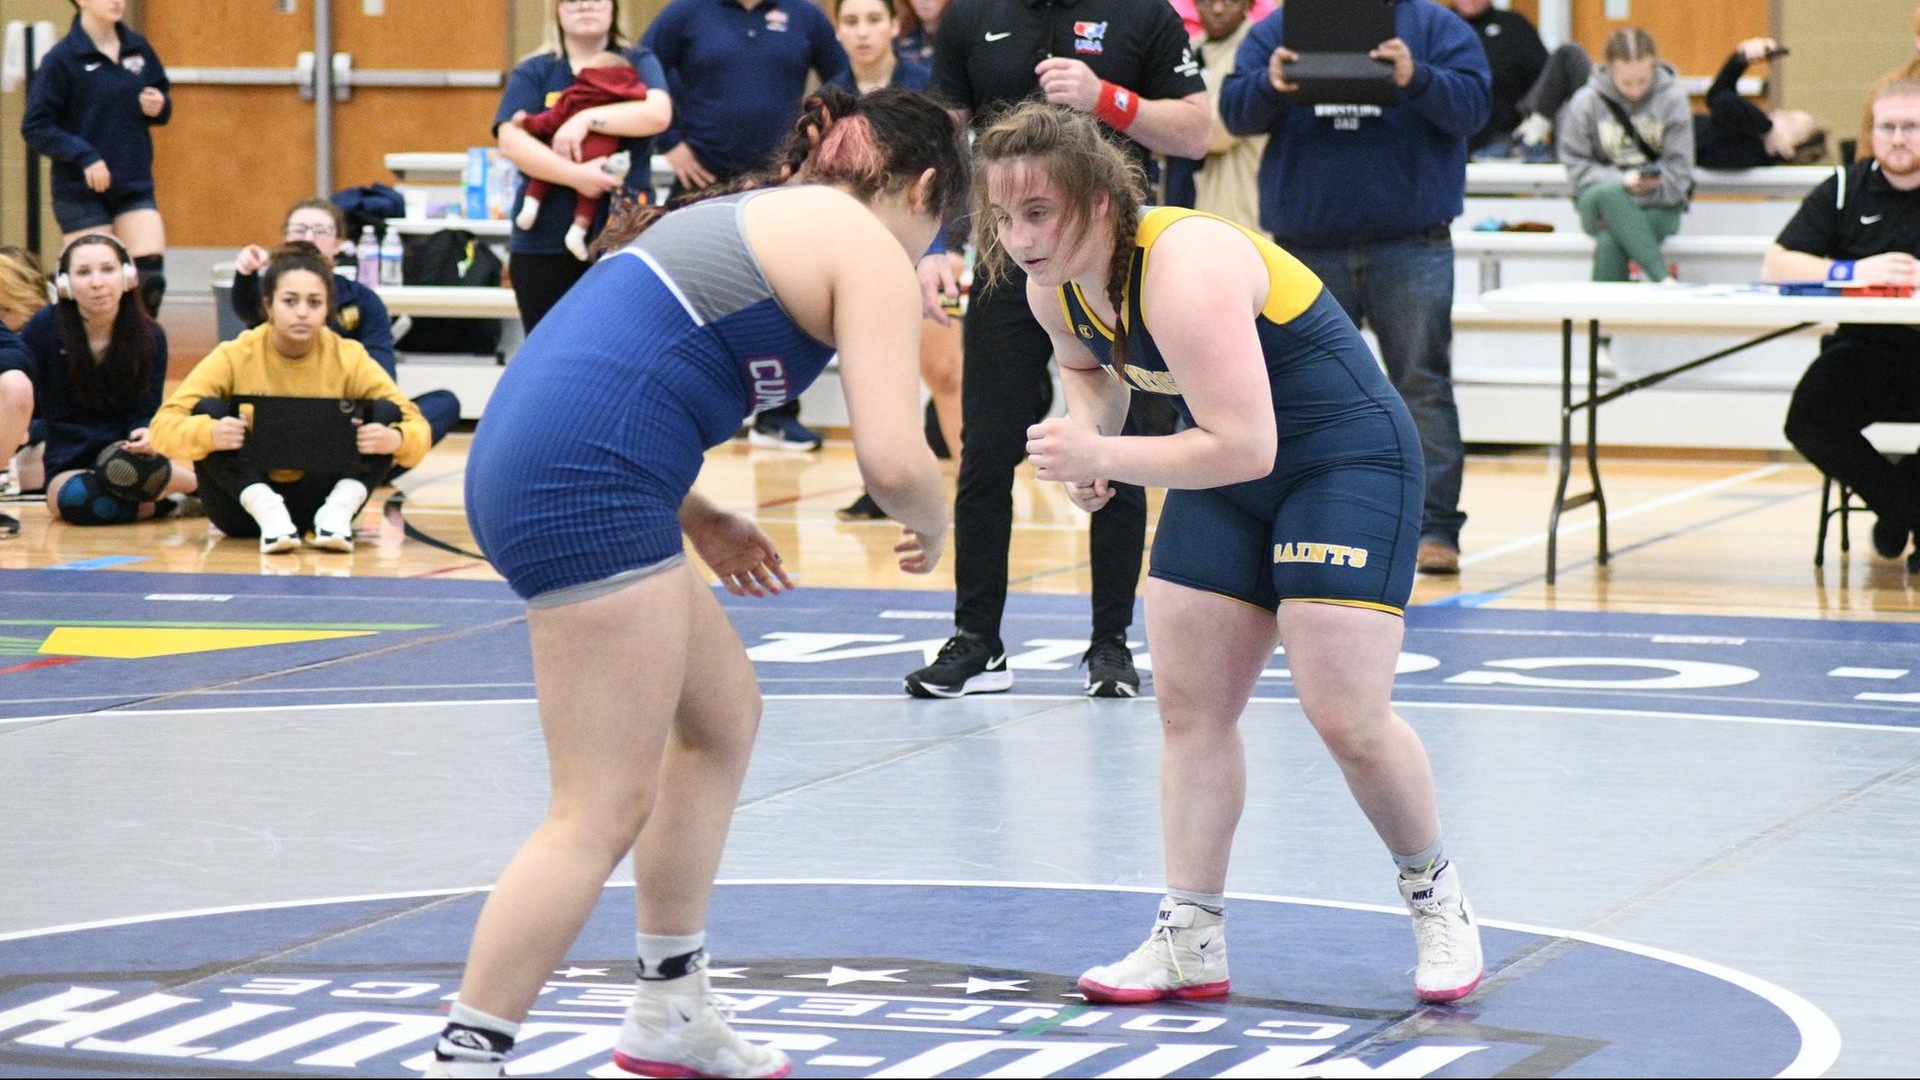 Geibe Places Runner-Up, Becomes First SHU Women's Wrestler To Earn All-MSC Honors